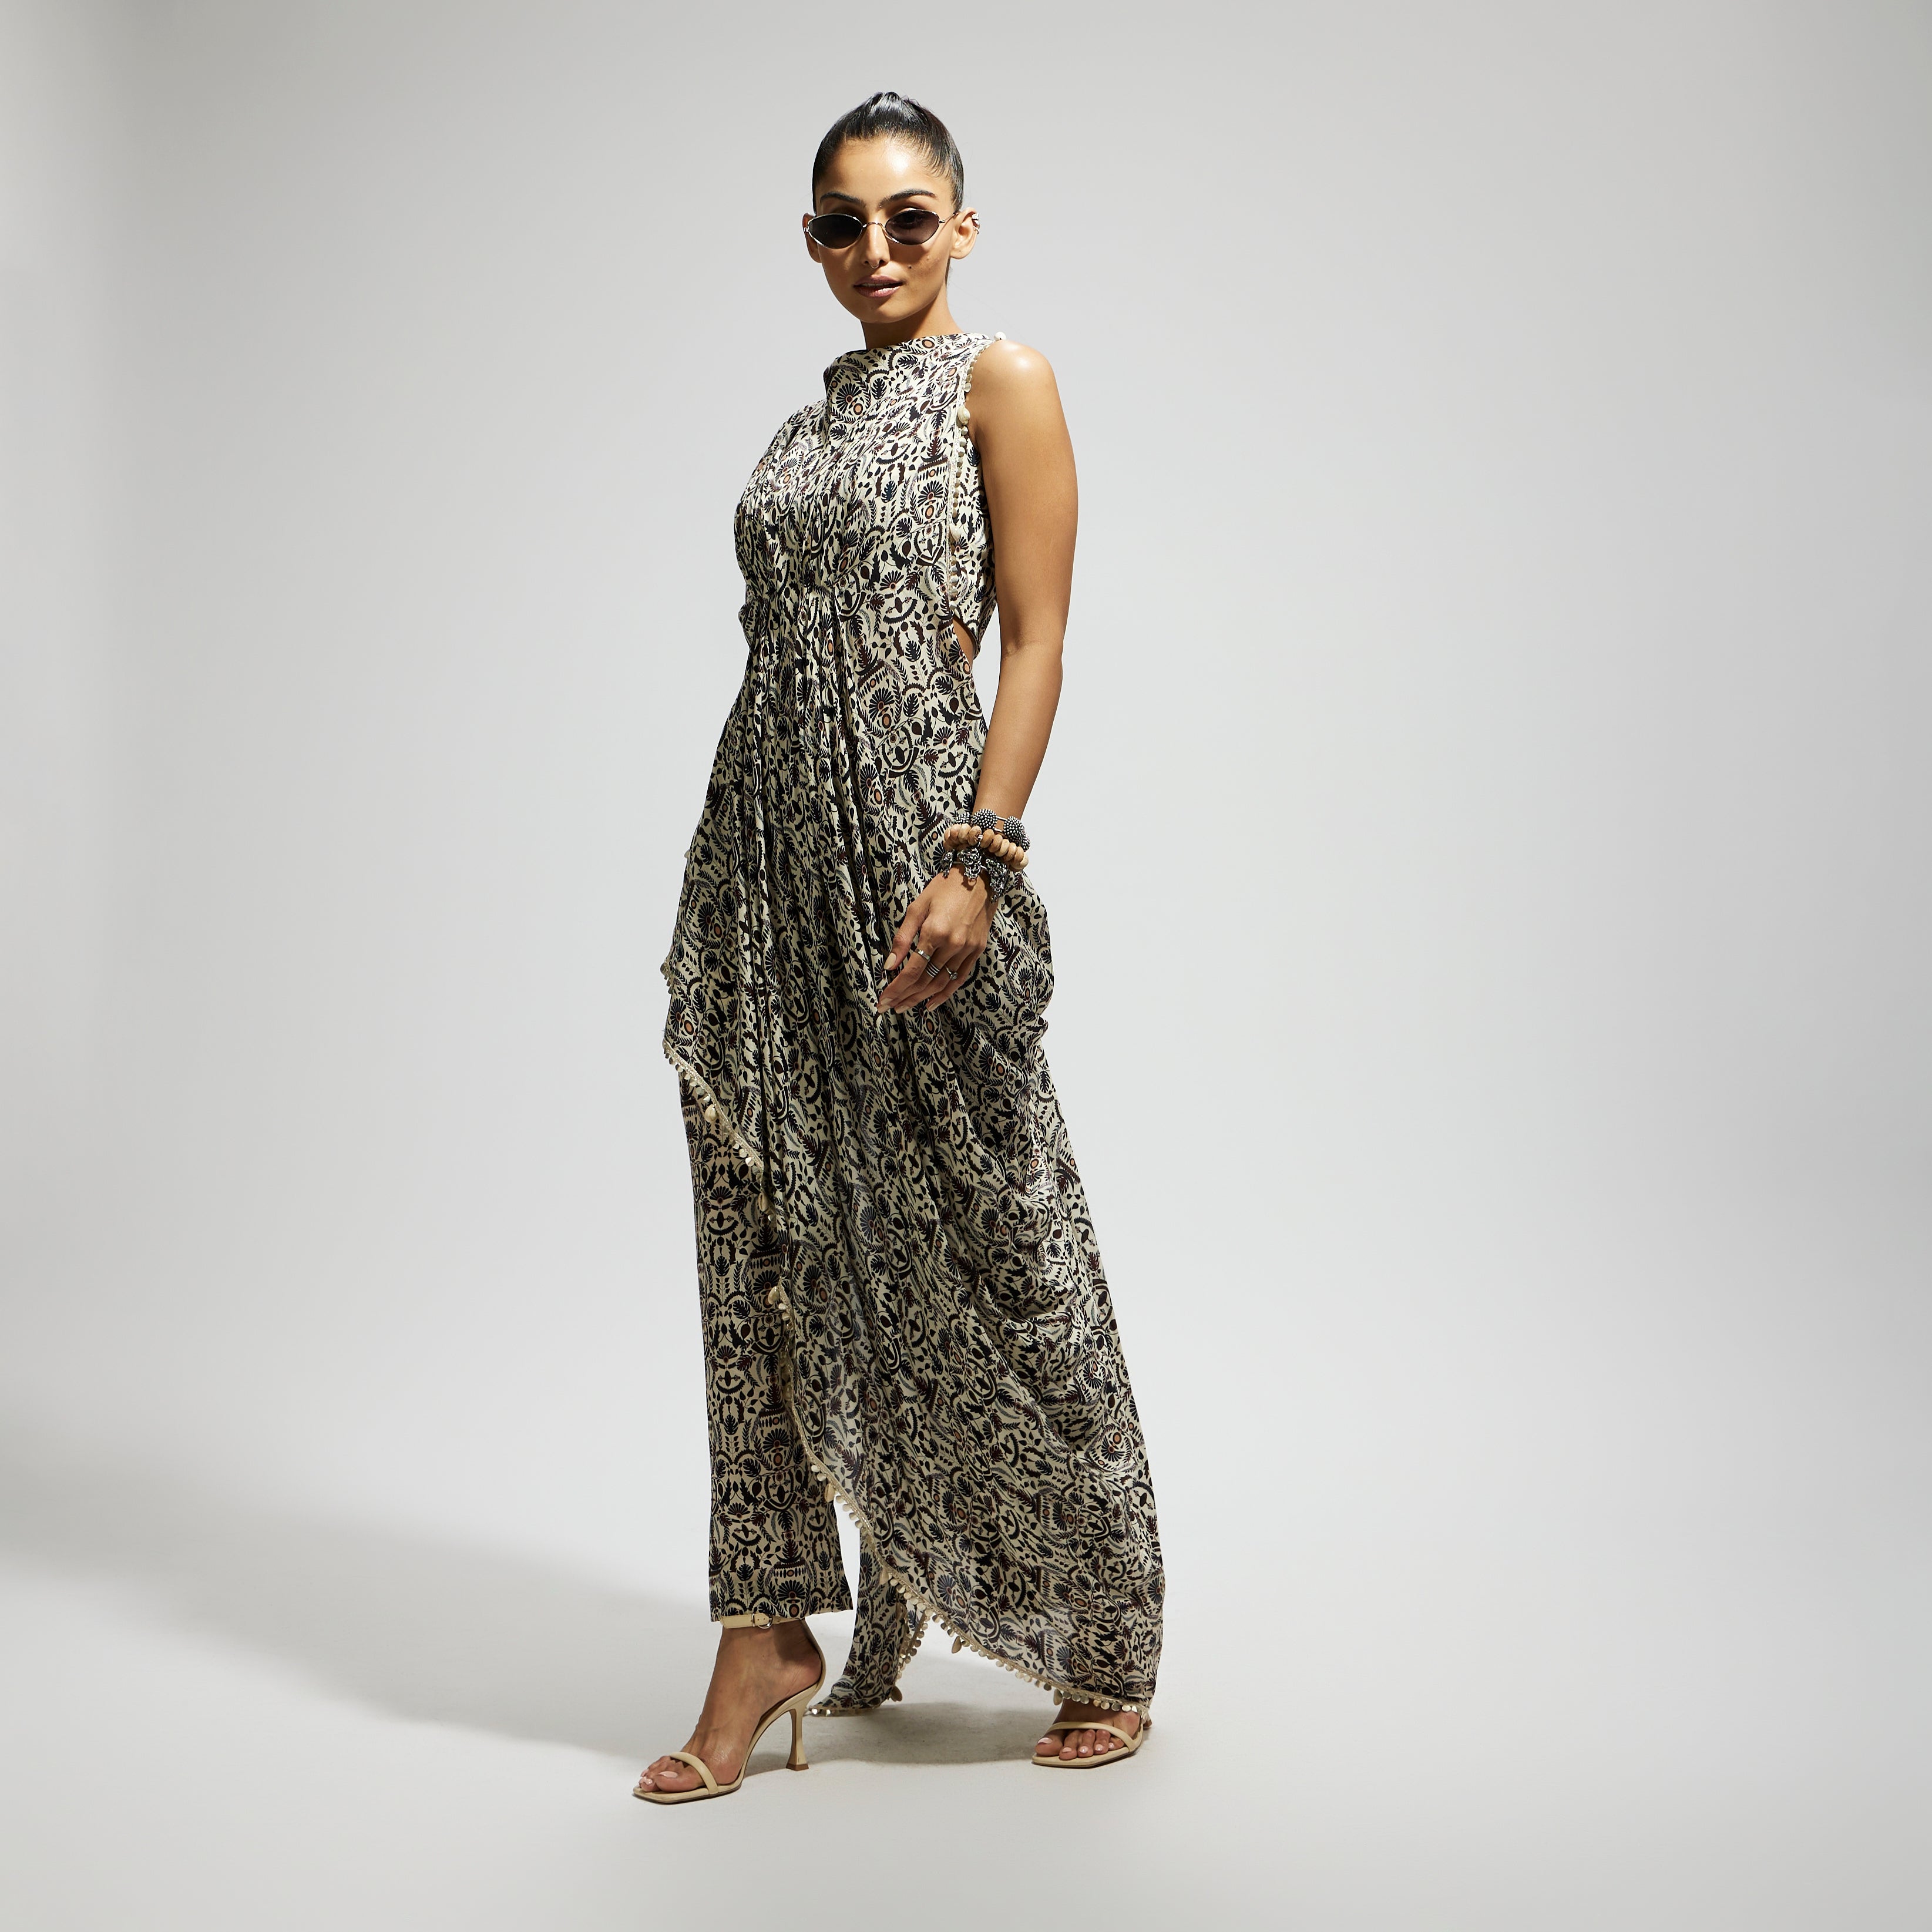 WHITE JAAL PRINT CROP TOP WITH ATTACHED DRAPE WITH PANTS